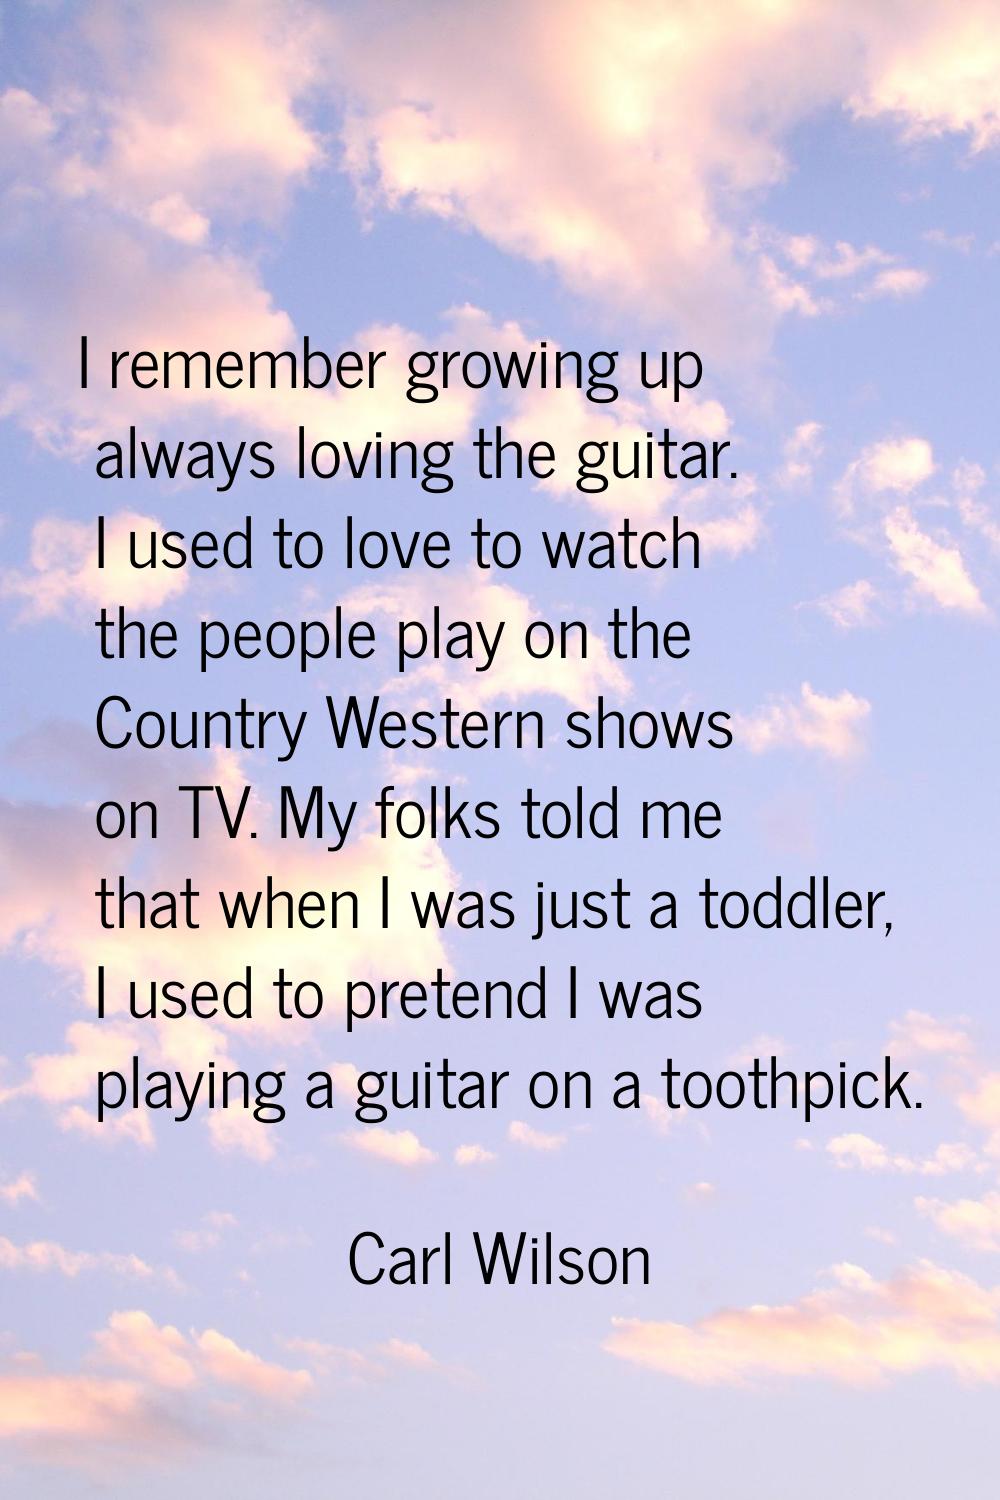 I remember growing up always loving the guitar. I used to love to watch the people play on the Coun